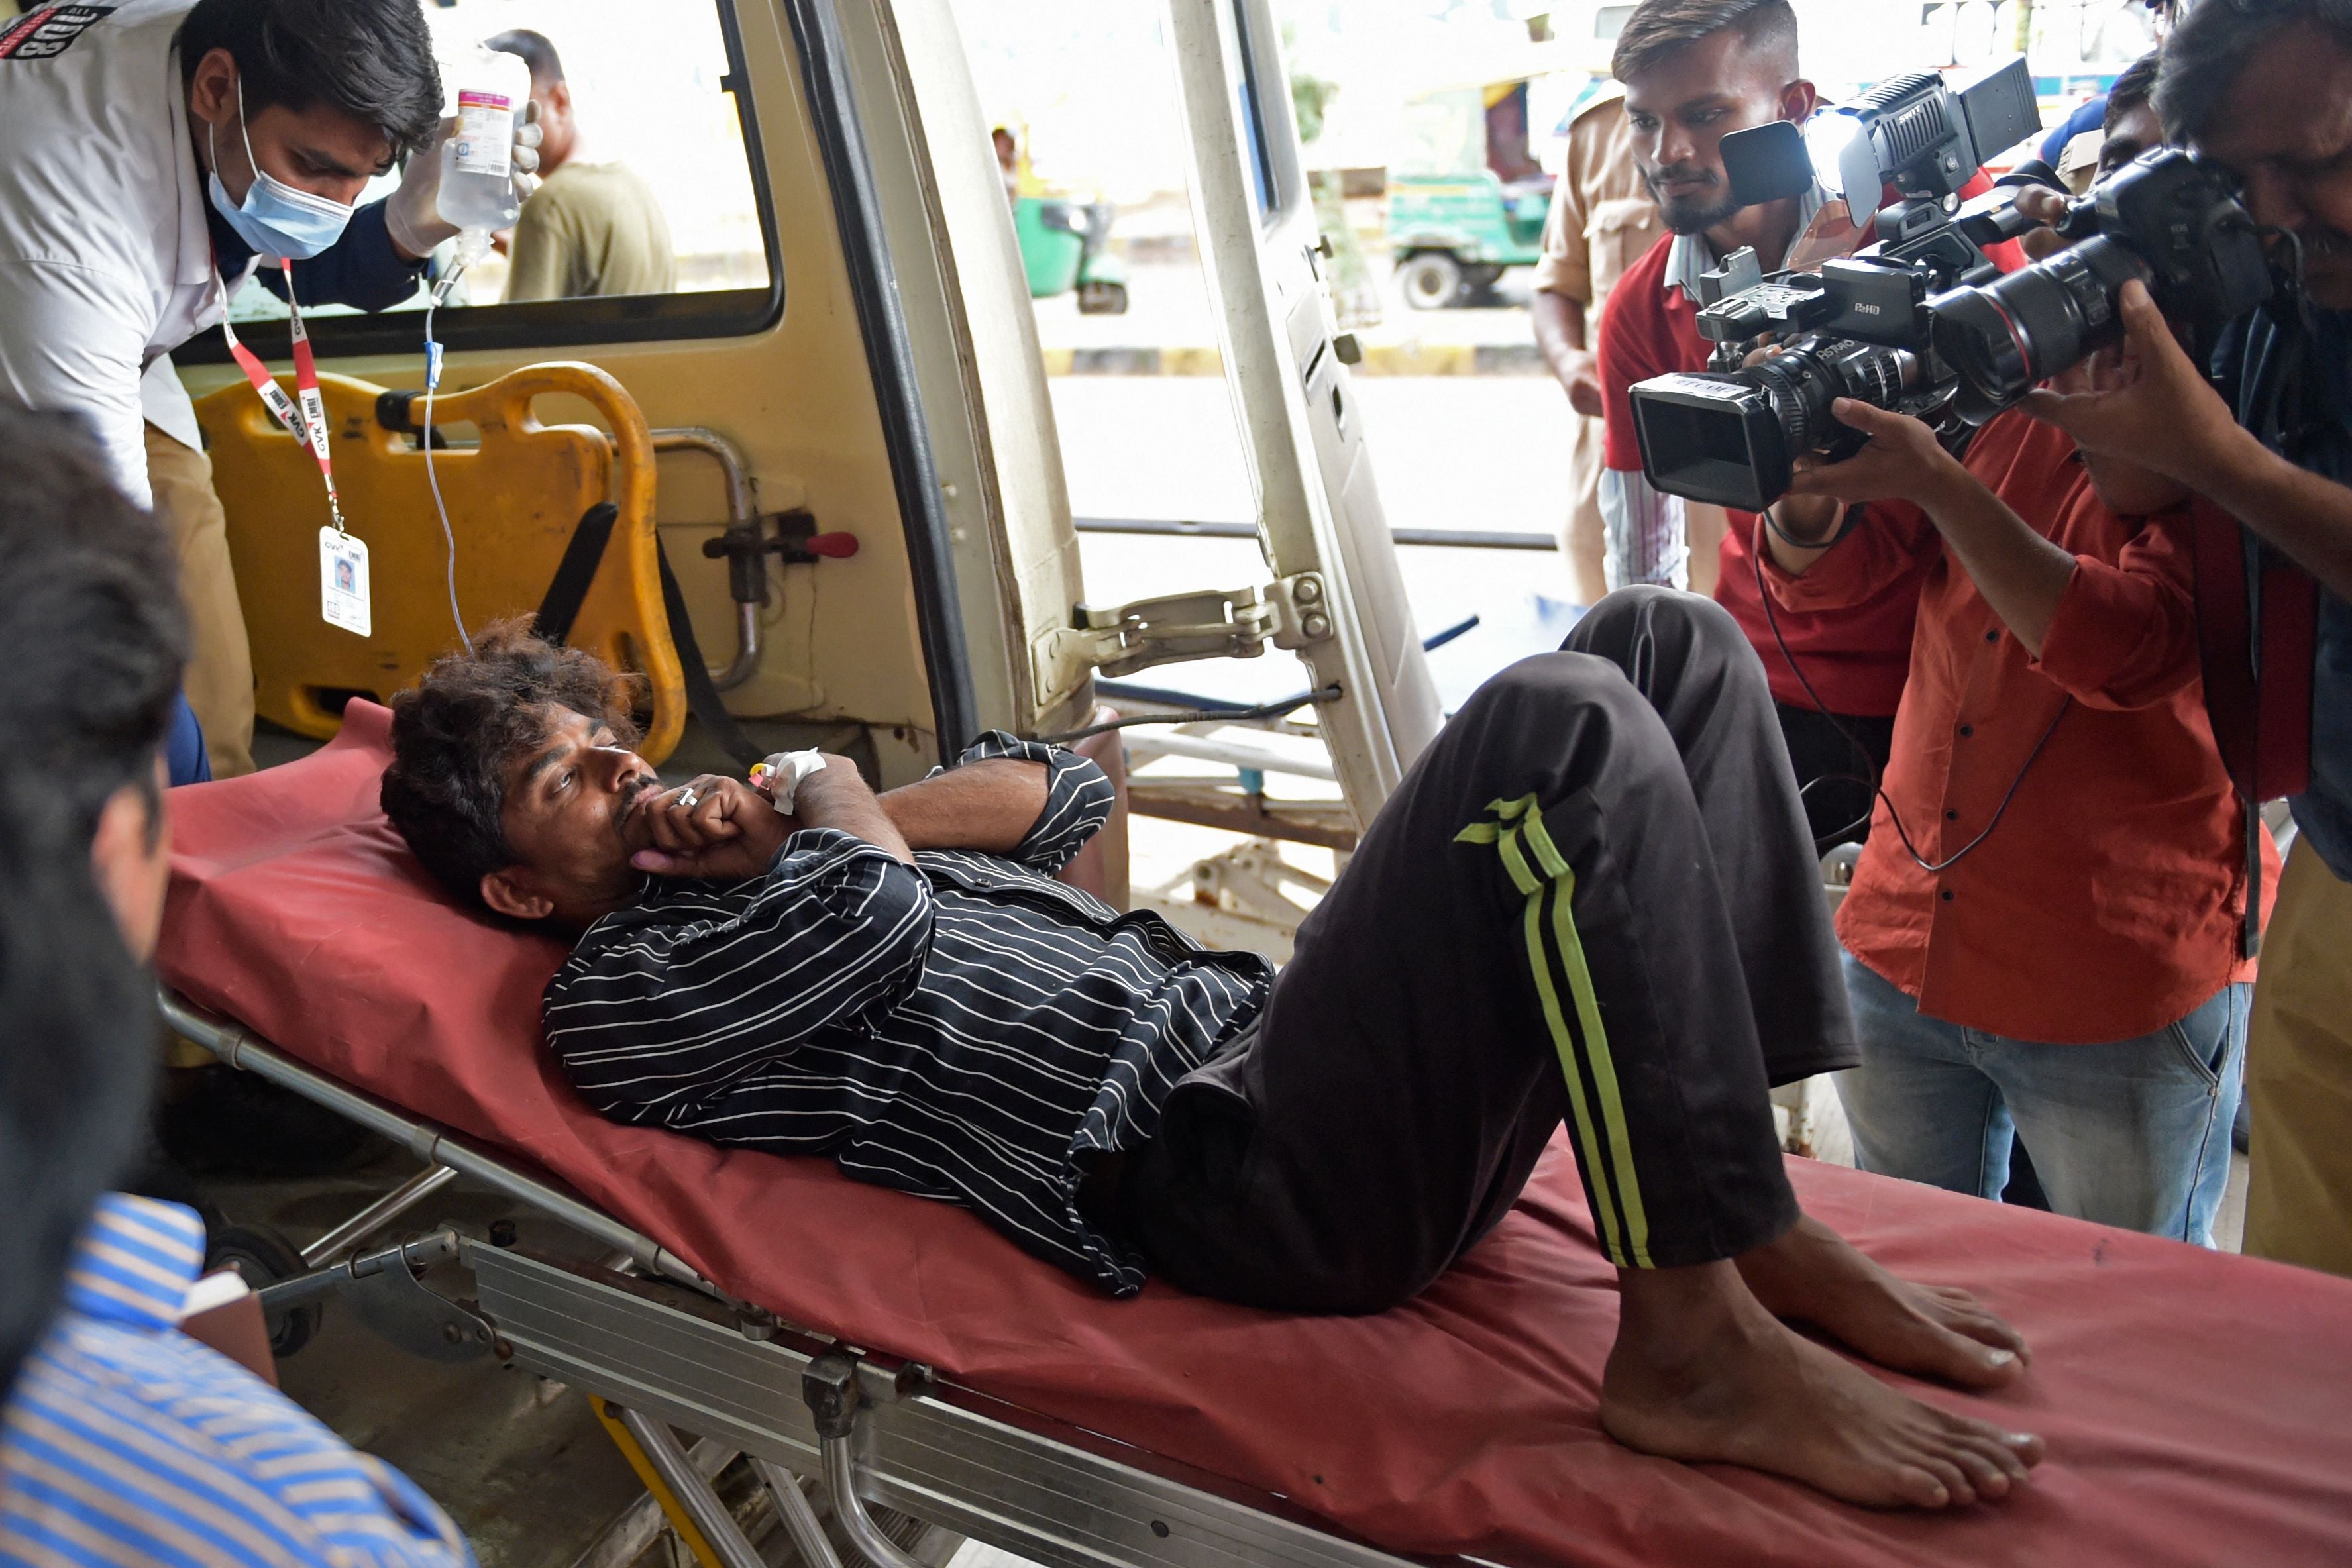 A man is shifted on a stretcher upon arriving in an ambulance at the civil hospital in Ahmedabad on Tuesday after suffering health problems due to consuming bootleg liquor